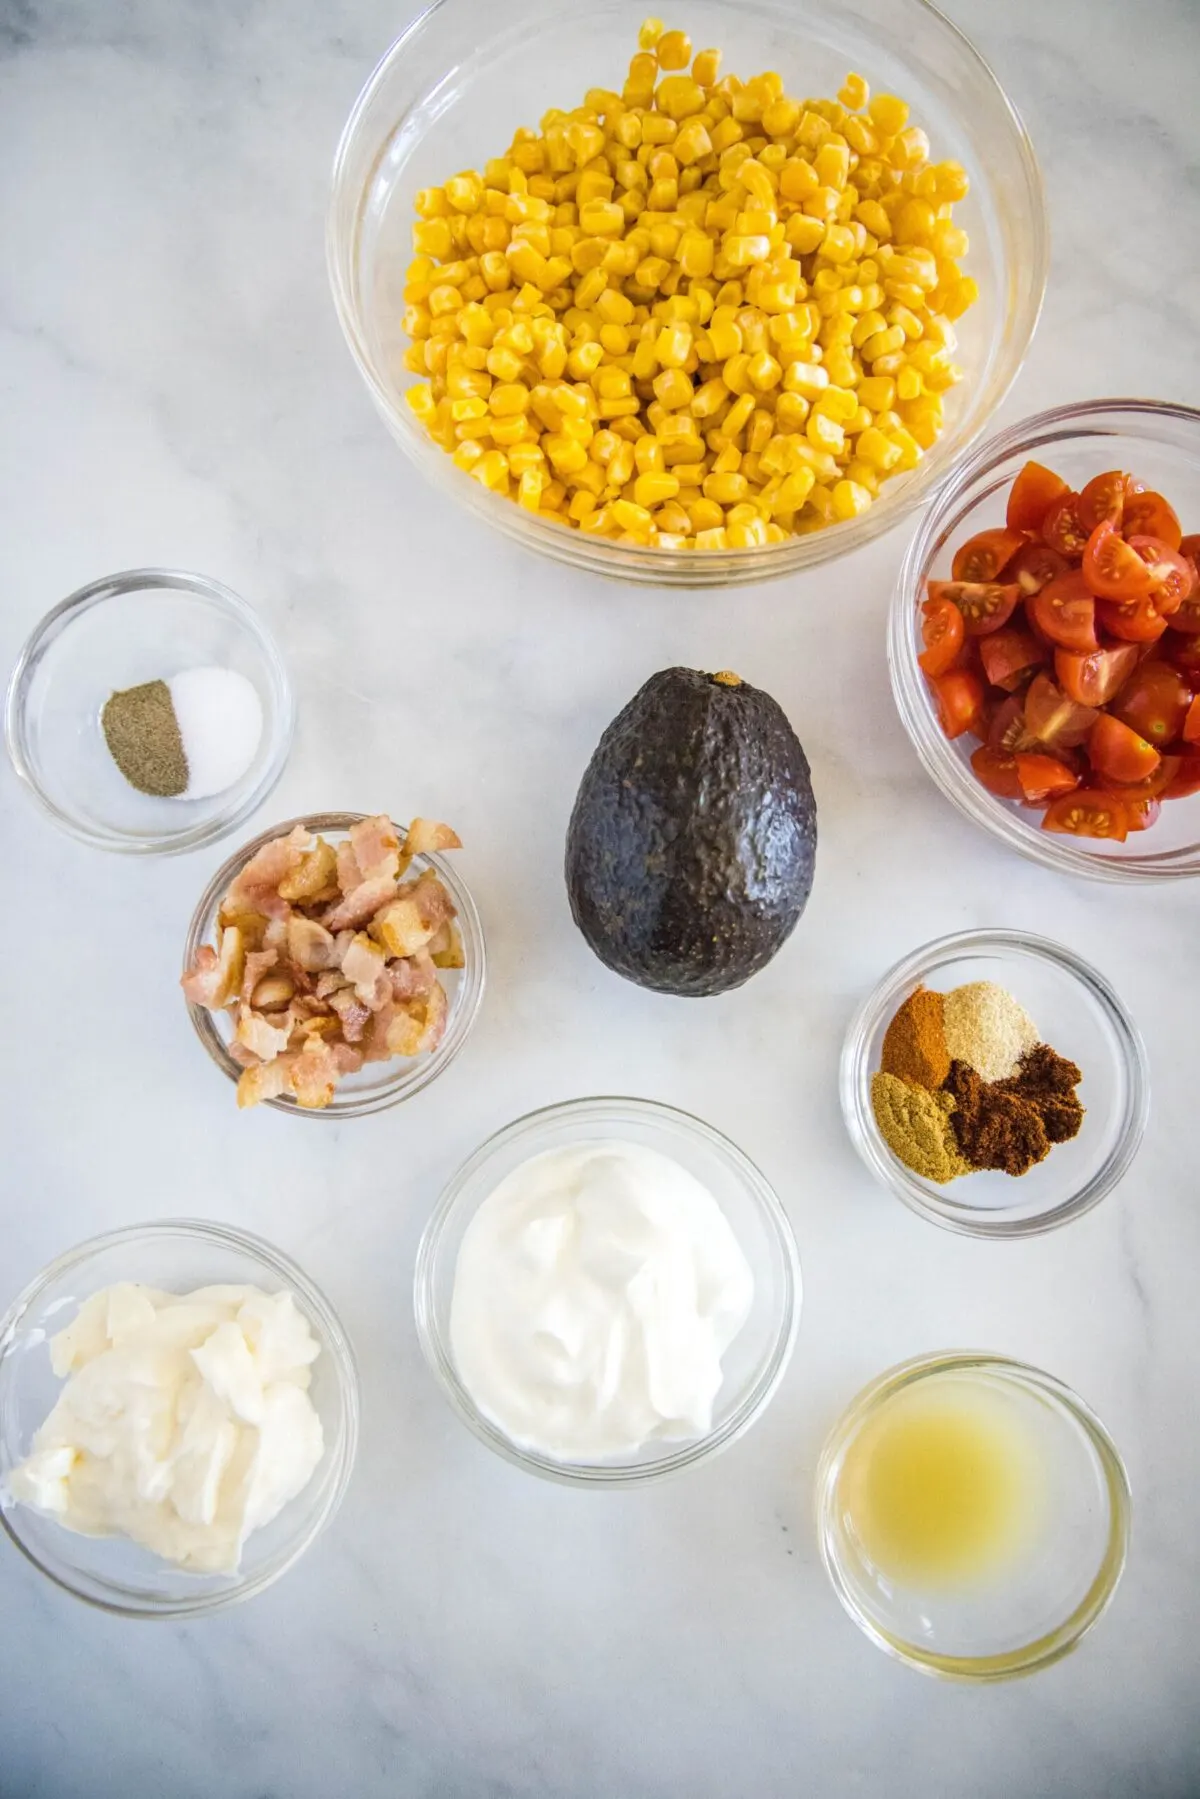 Overhead view of the ingredients needed for southwestern corn salad: a bowl of corn, a bowl of quartered cherry tomatoes, a bowl of cooked bacon crumbles, a bowl of salt and pepper, a bowl of greek yogurt, a bowl of mayo, a bowl of lime juice, a bowl of chili powder, cumin, garlic powder, and black pepper, and an avocado